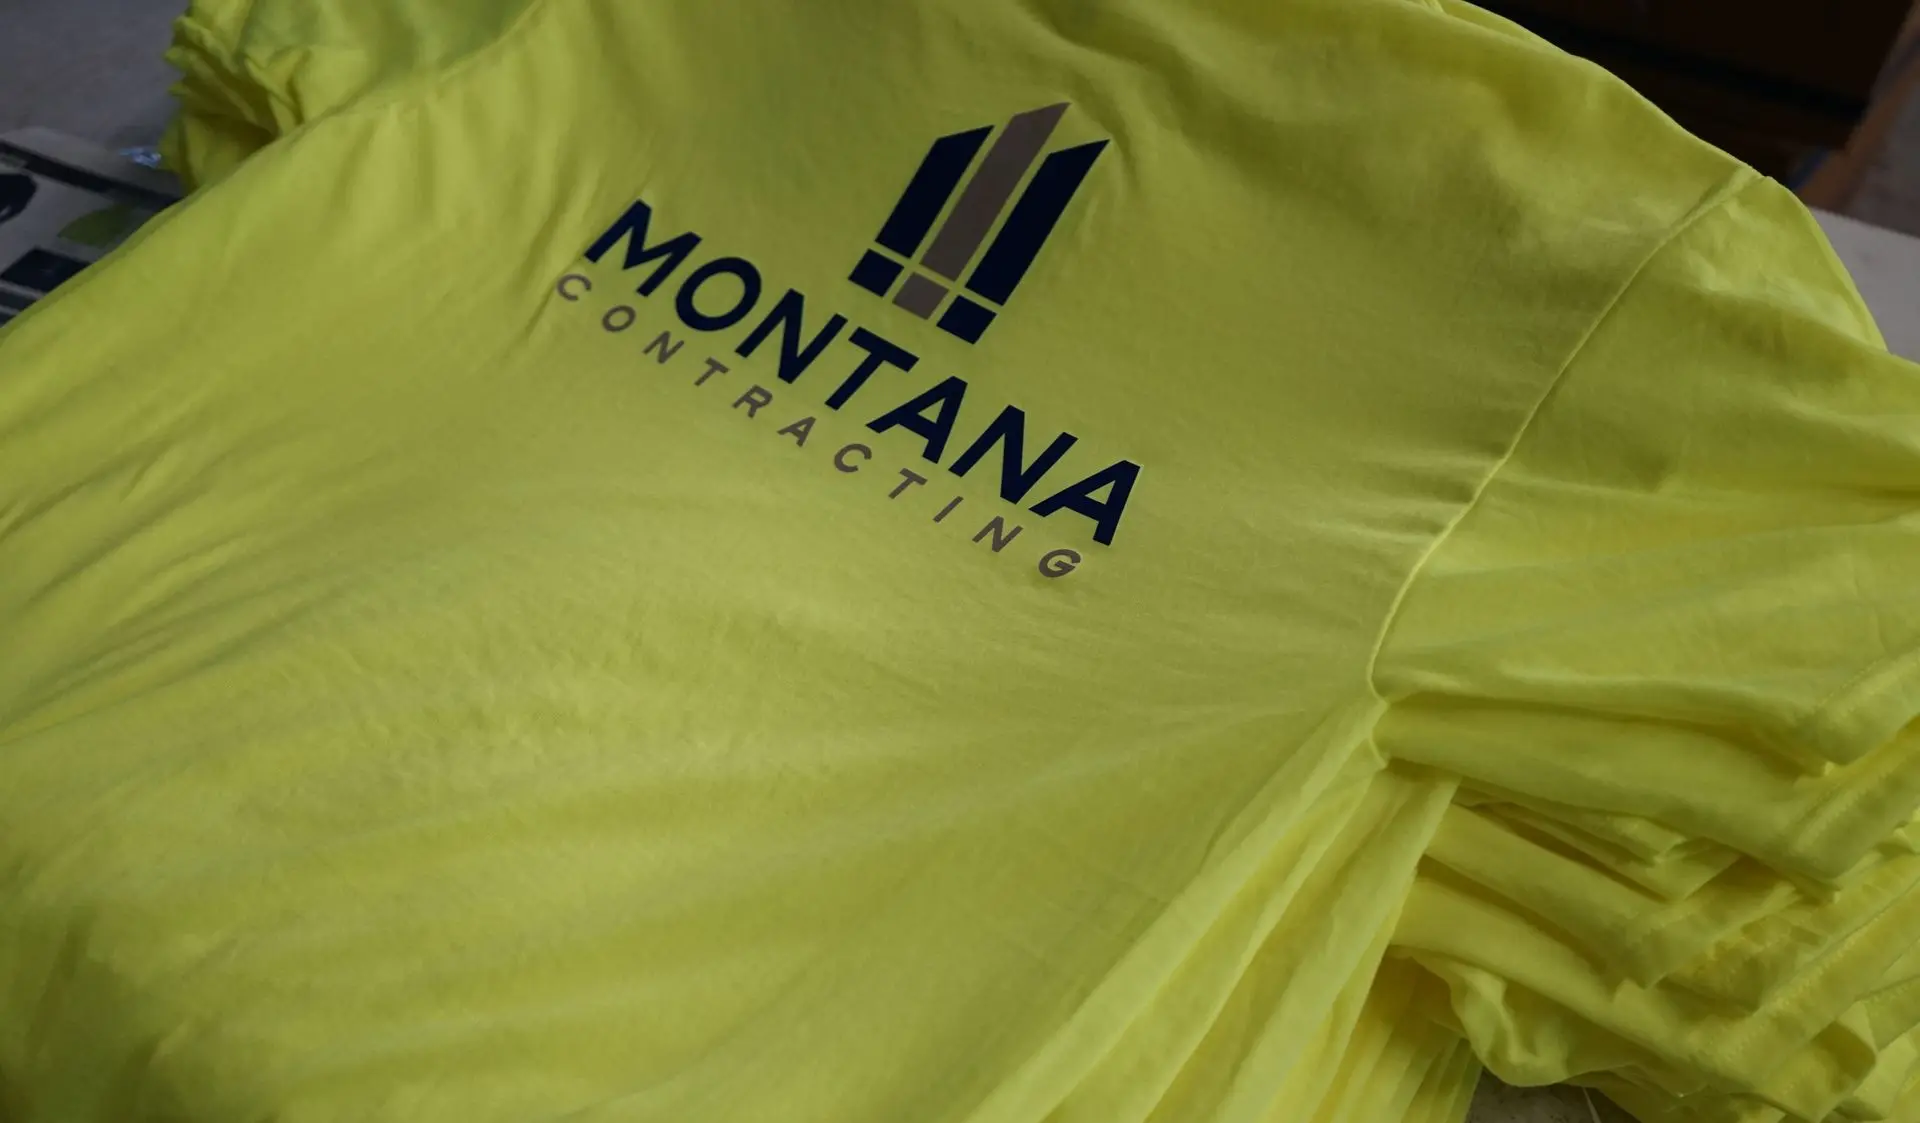 Bright yellow high-visibility safety shirt with the 'MONTANA CONTRACTING' logo prominently displayed. The shirt's vivid color ensures worker visibility on-site, while the logo in navy blue provides a professional representation of the Montana Contracting brand, known for its commitment to safety and quality in construction services.